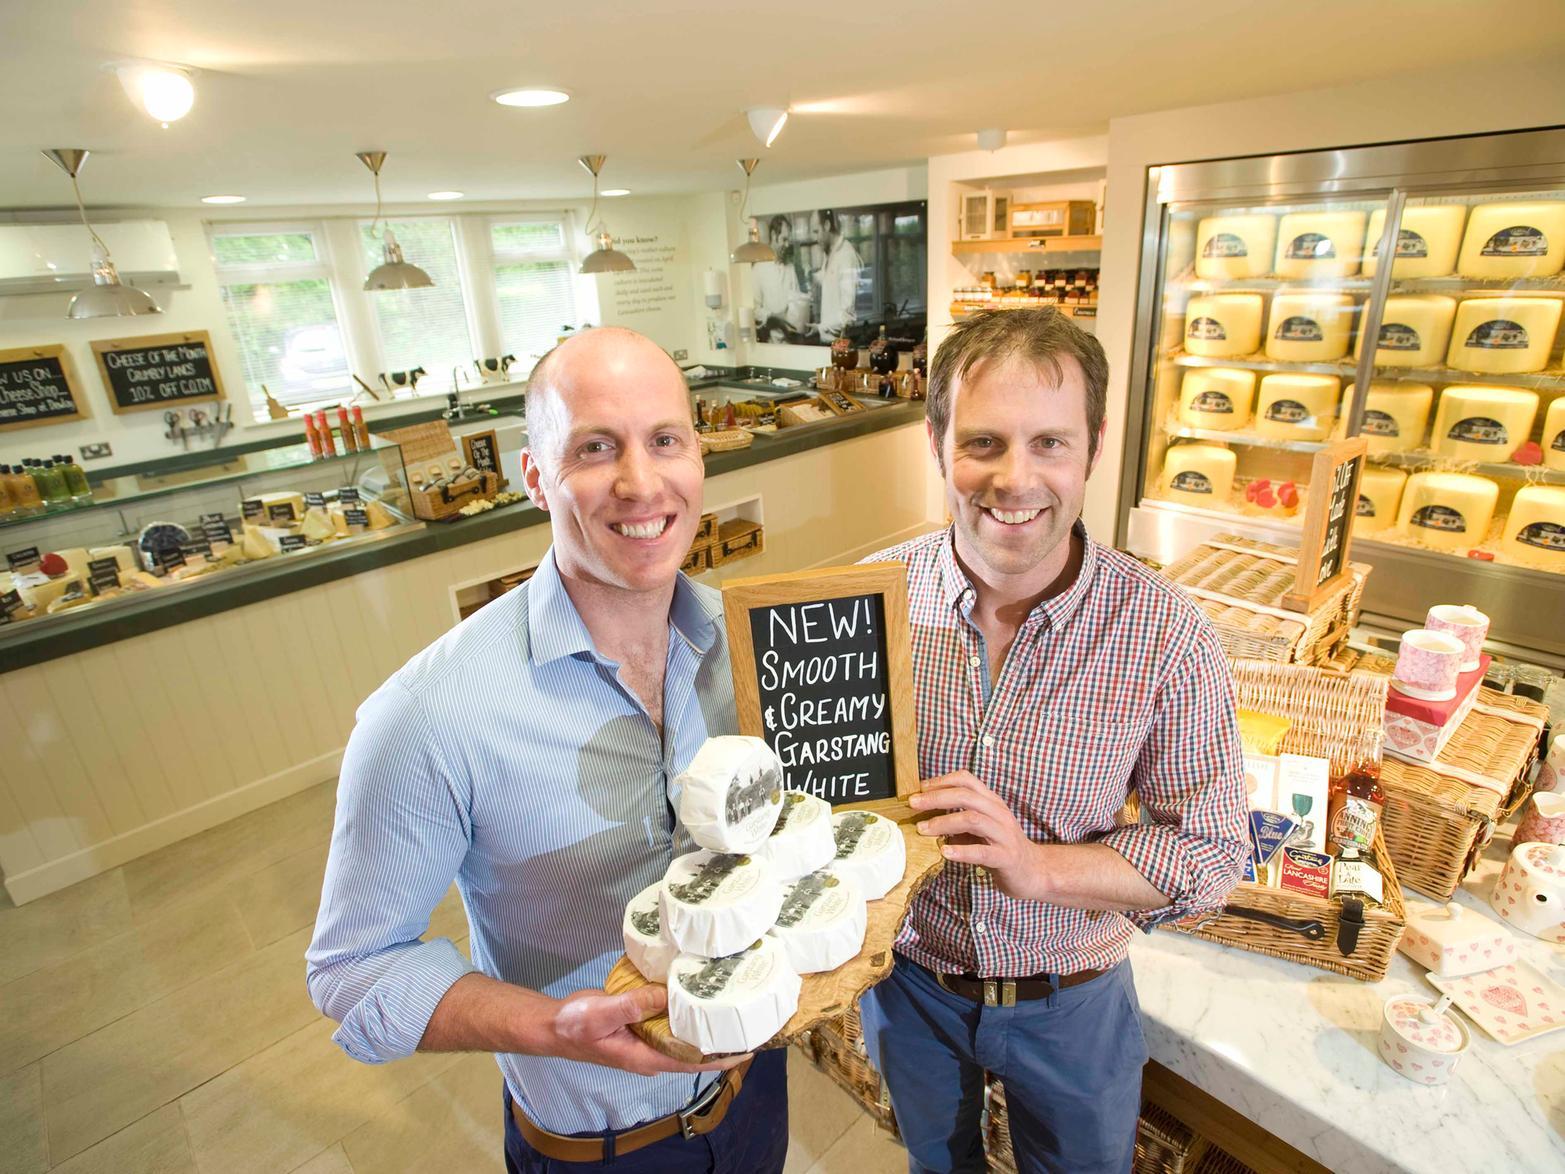 The firm is run by third generation brothers Nick and Richard Kenyon.
The shop even has a viewing gallery overlooking the dairy so customers can see the cheese being made.